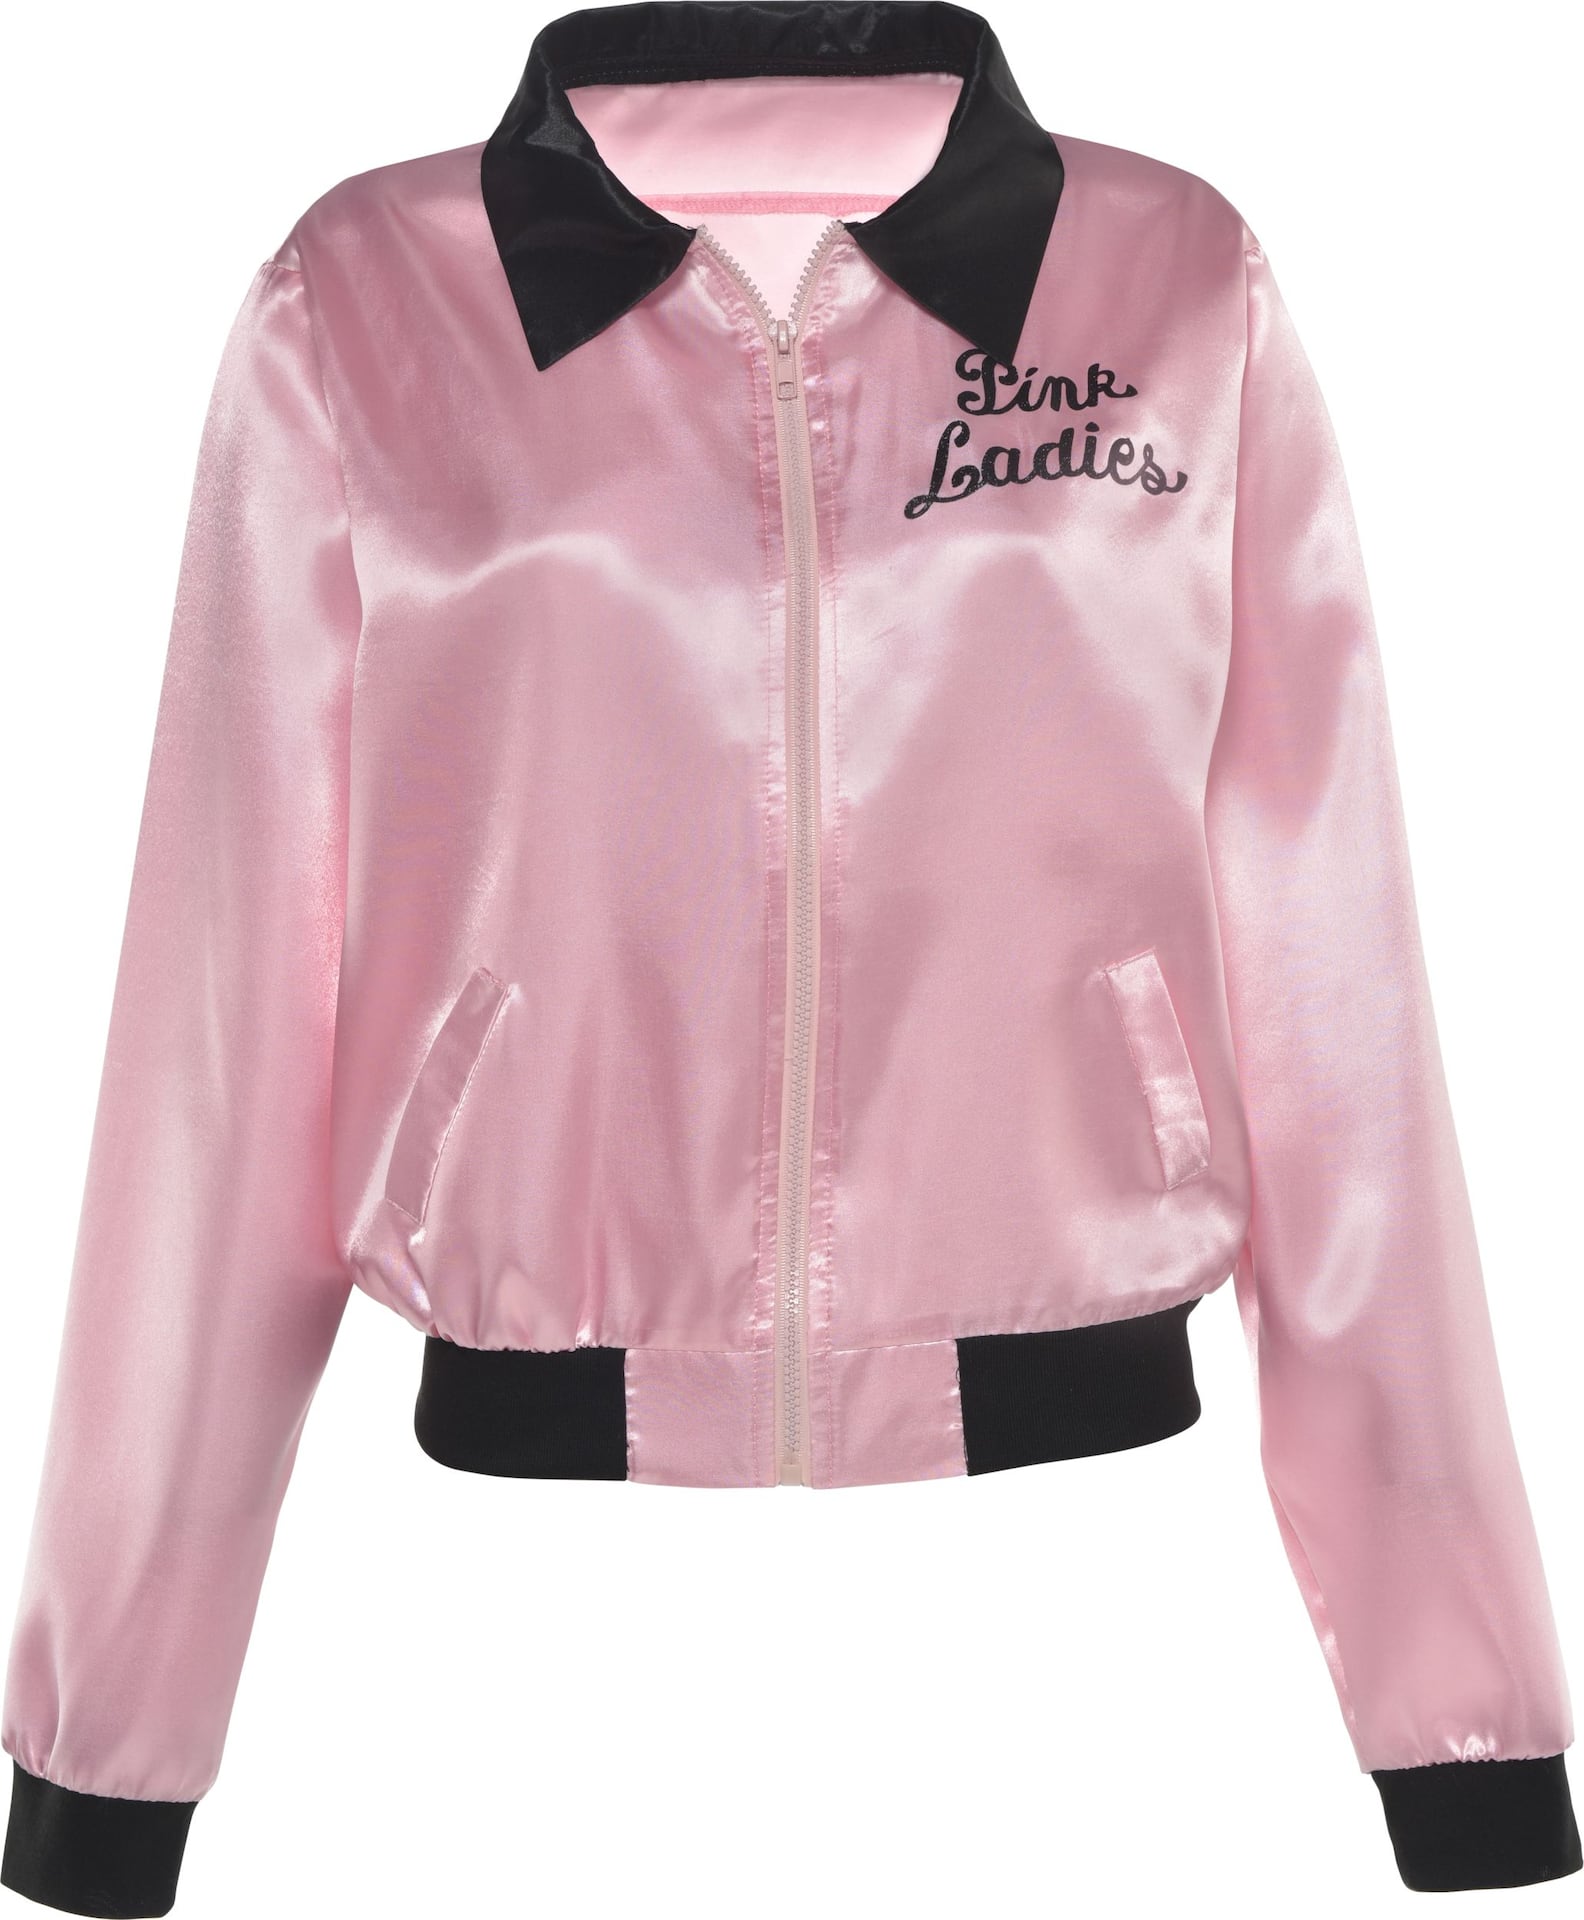 Adult Grease Pink Ladies Jacket, Pink/Black, One Size, Wearable